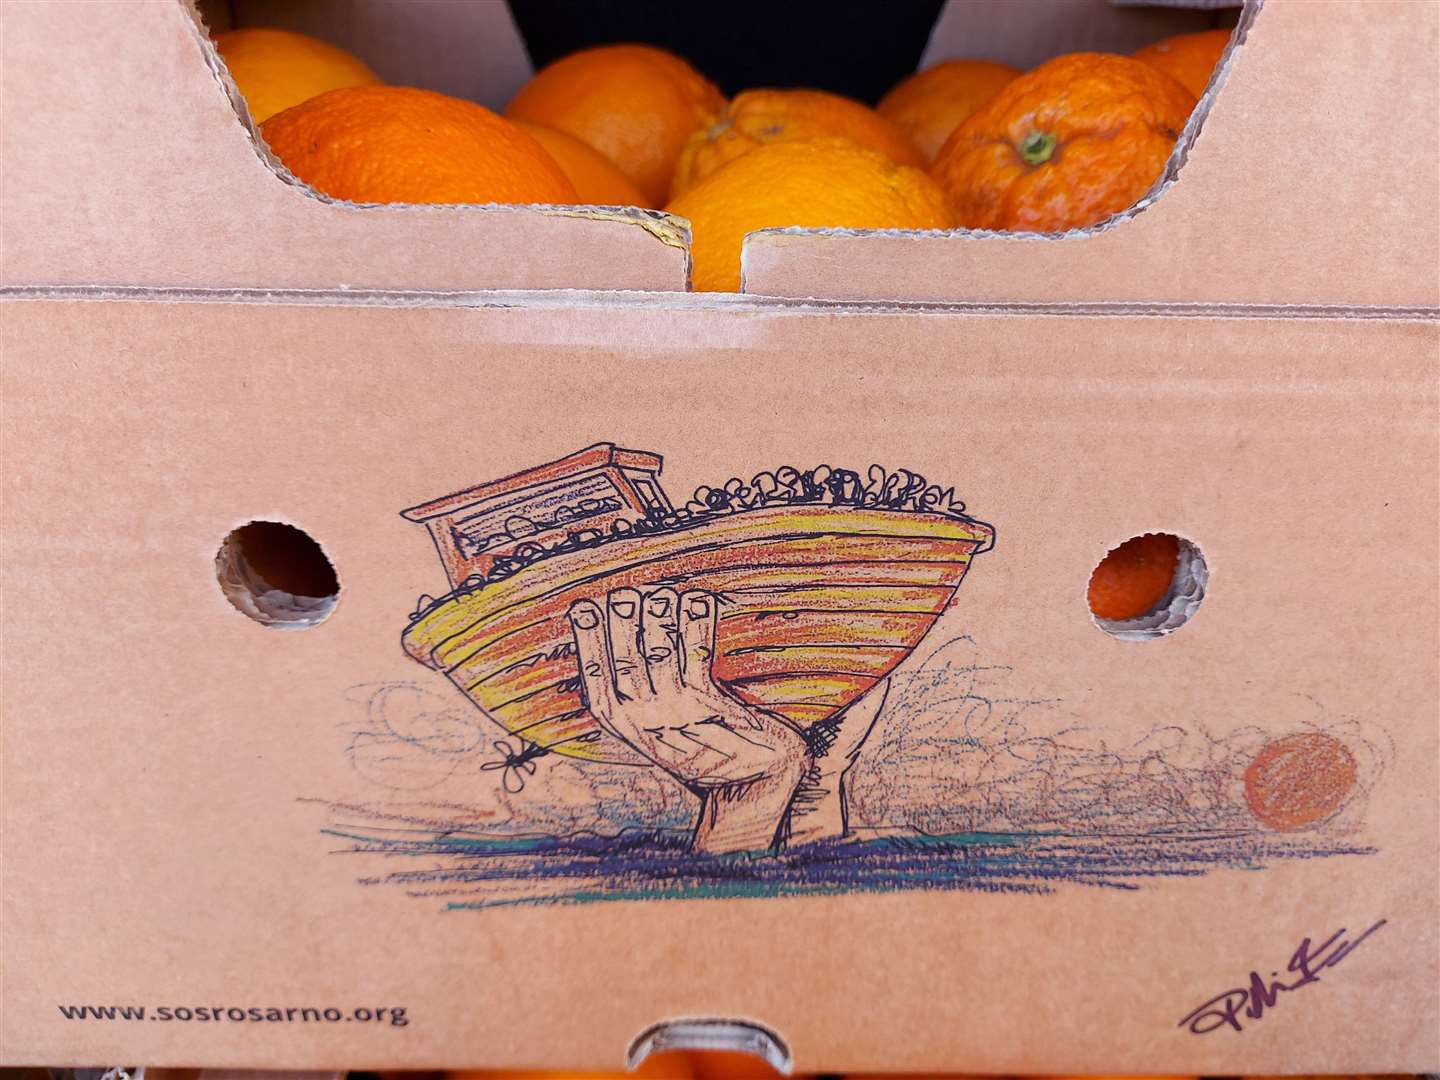 Operation Orange comes with the promose of fair wages to migrants involved in fruit picking in Italy.